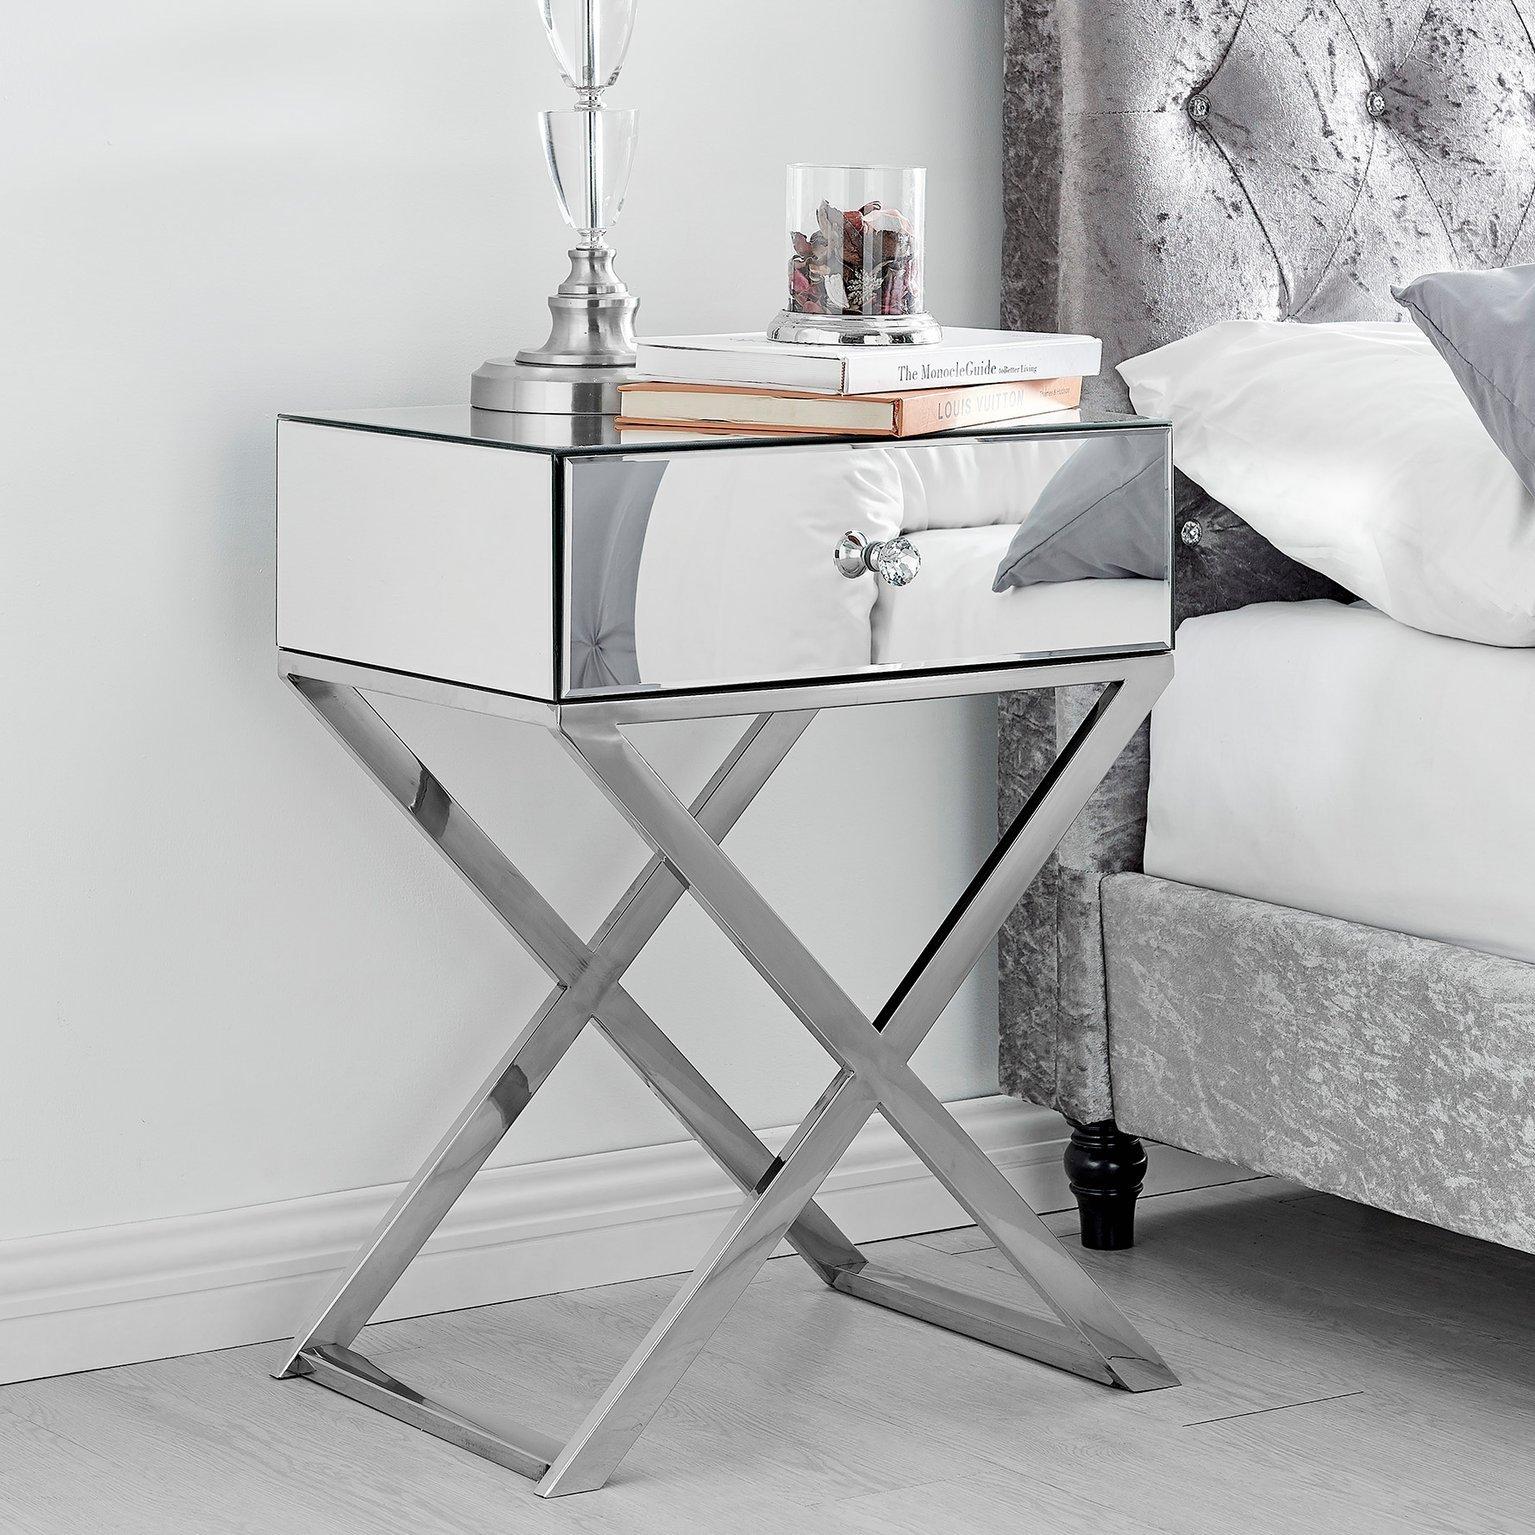 Celeste Single Drawer Mirrored bedside Table With Silver Chrome Cross Legs